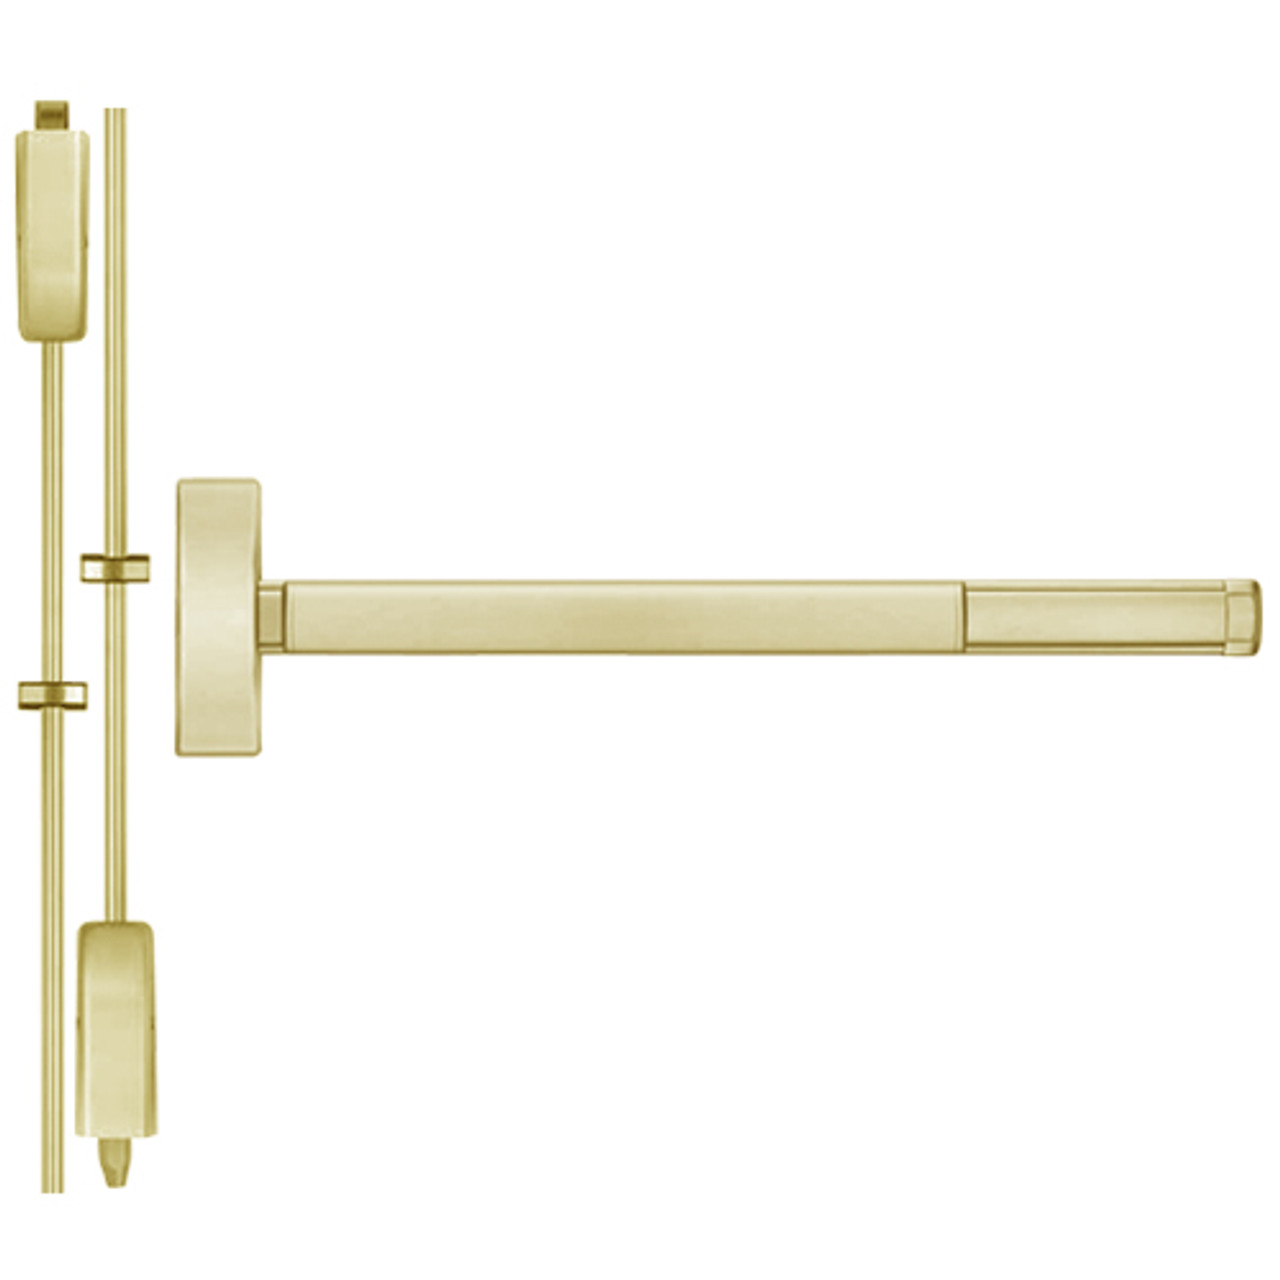 2208-606-36 PHI 2200 Series Non Fire Rated Apex Surface Vertical Rod Exit Device Prepped for Key Controls Lever/Knob in Satin Brass Finish